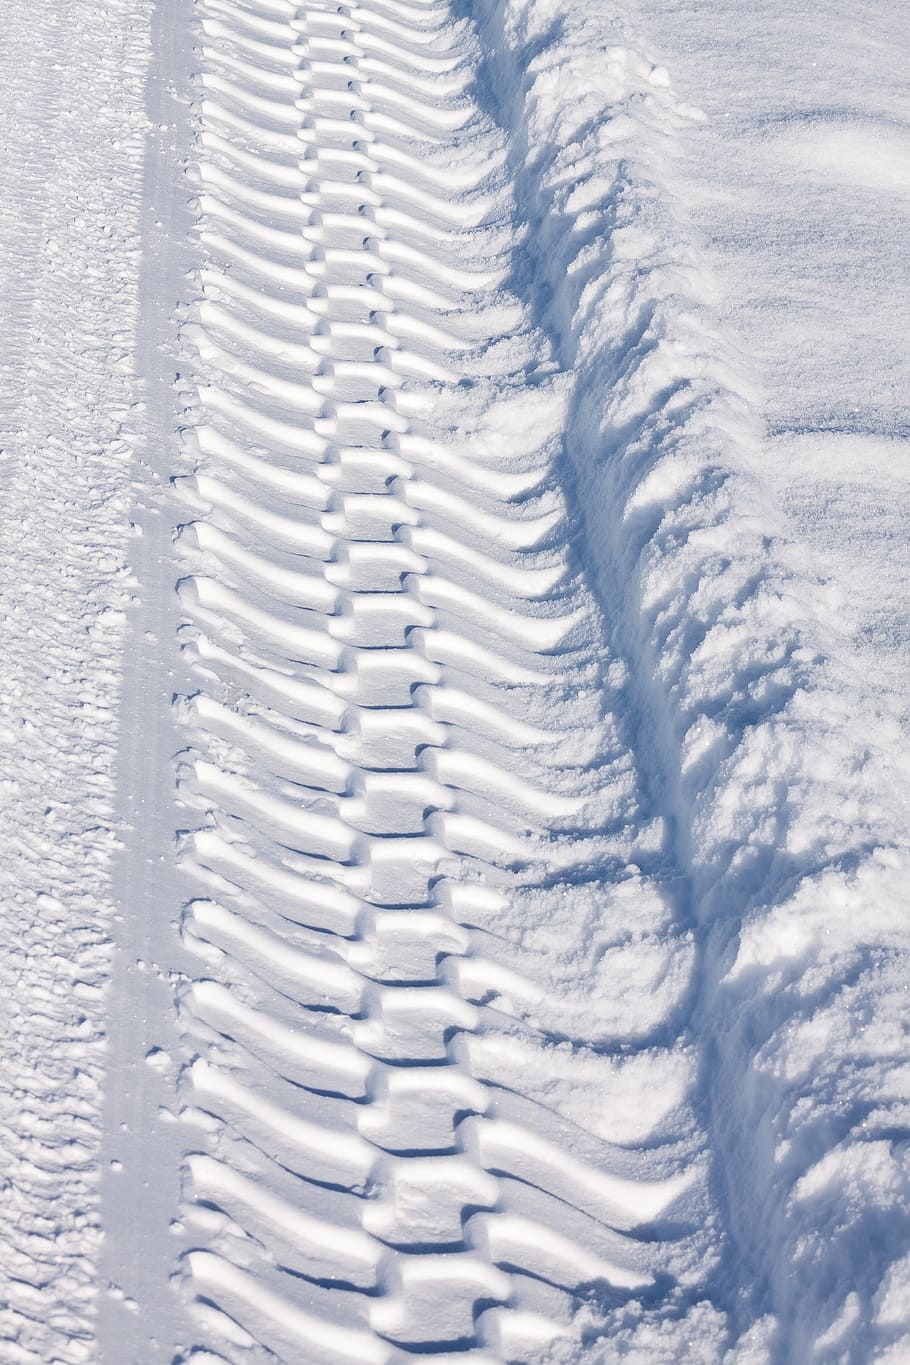 trace, snow, white, sunny, tire track, tractor, winter, pattern, fund, background